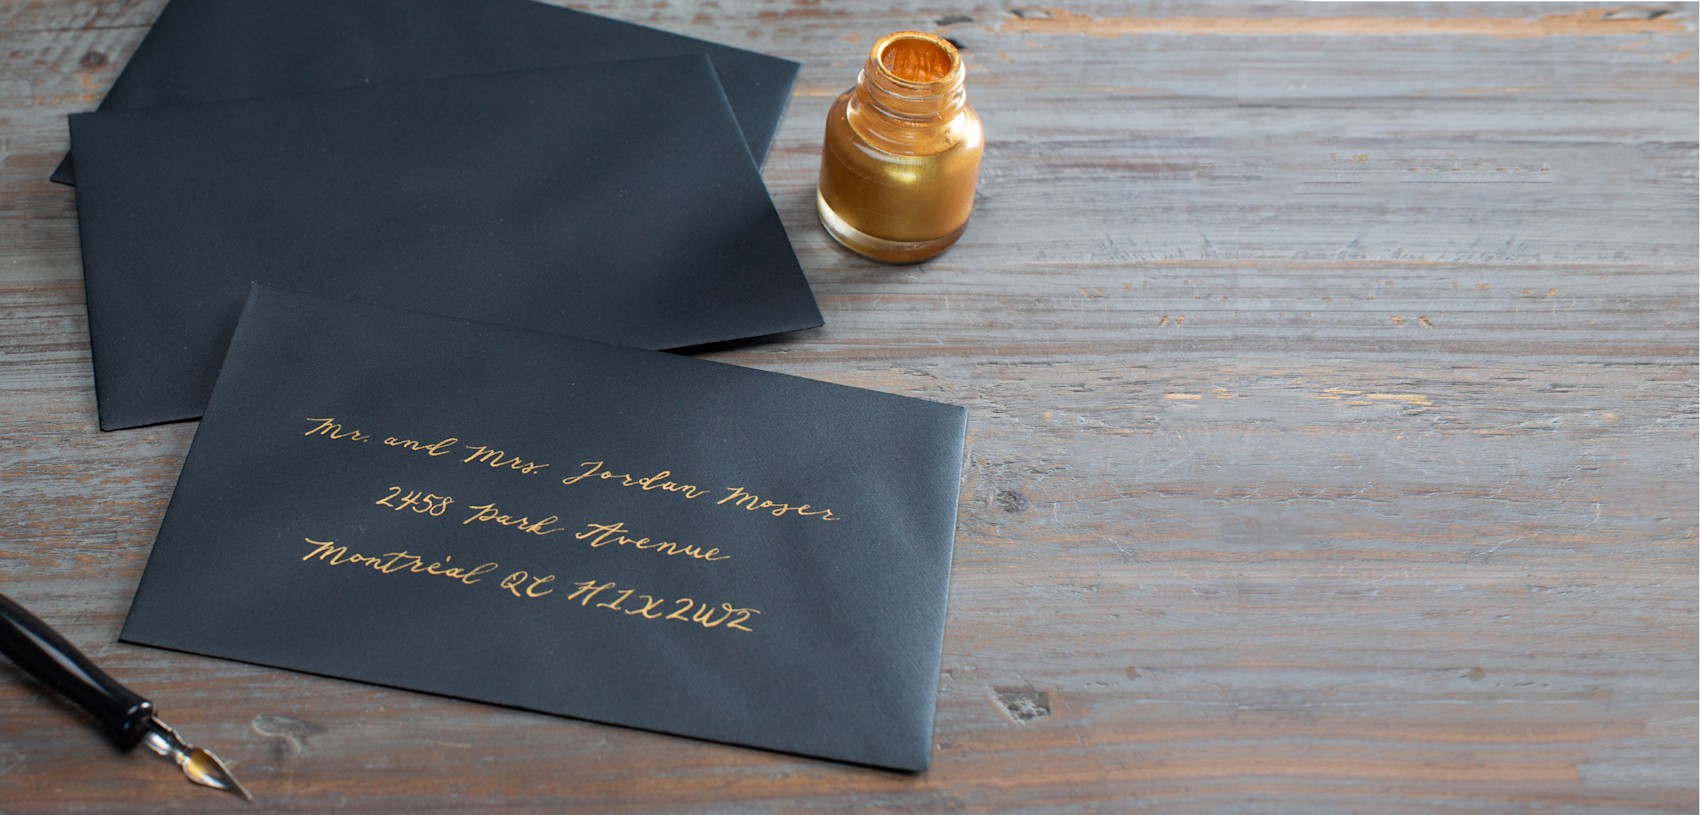 Larger version: navy envelopes with gold writing